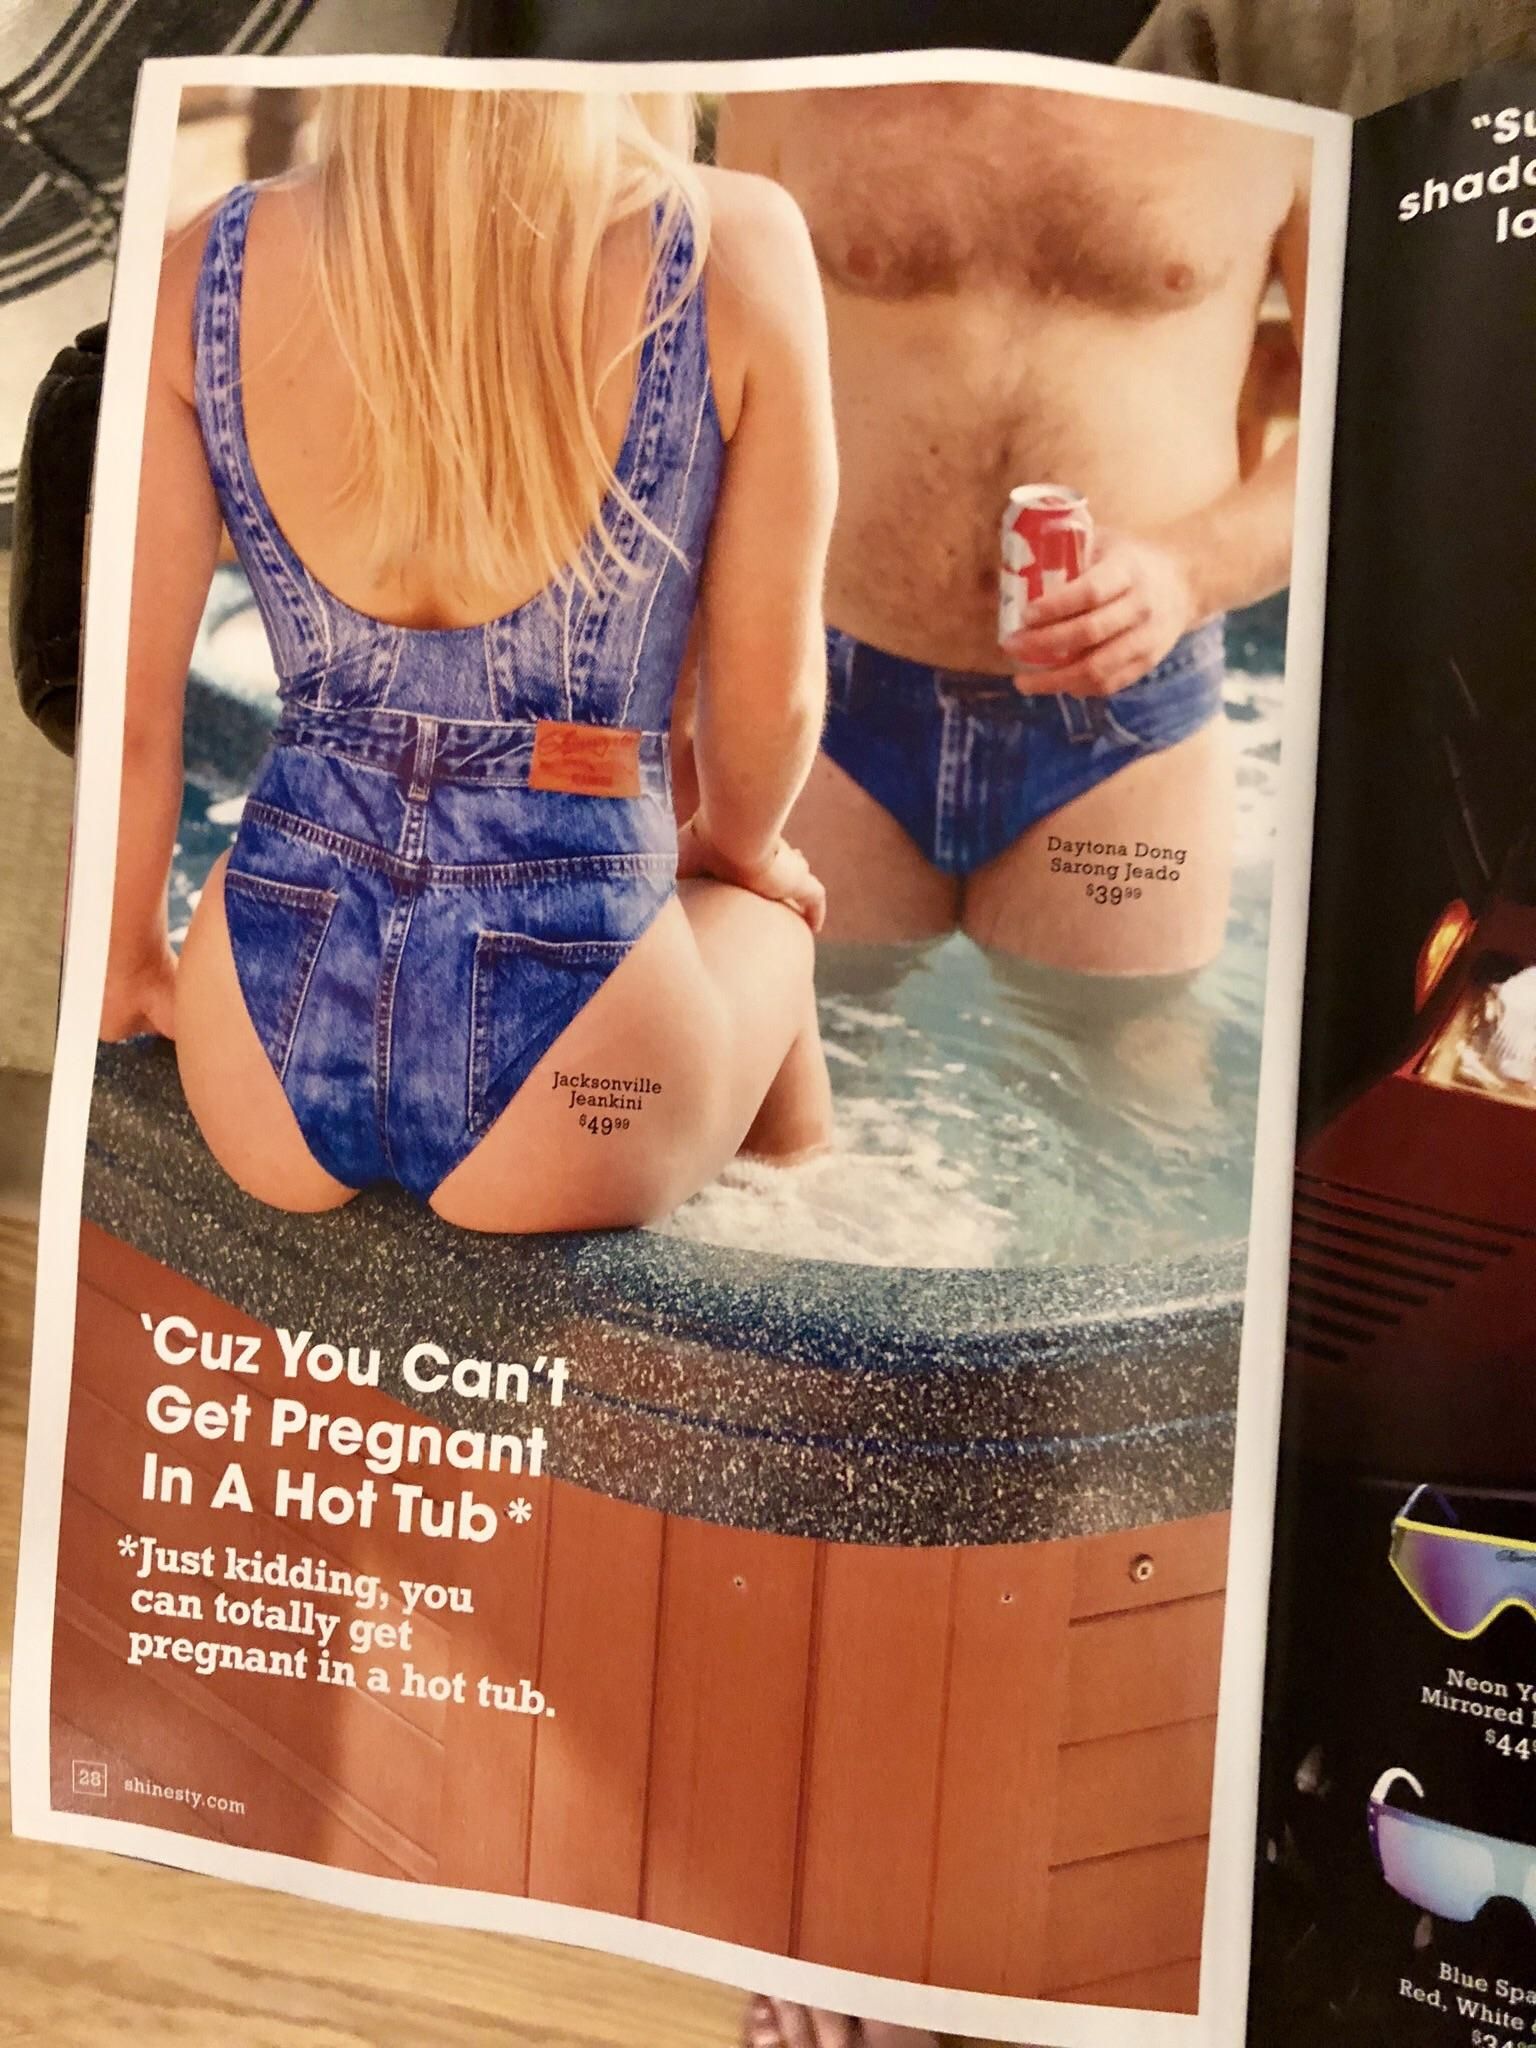 I have no idea how we got on the mailing list for this catalog...